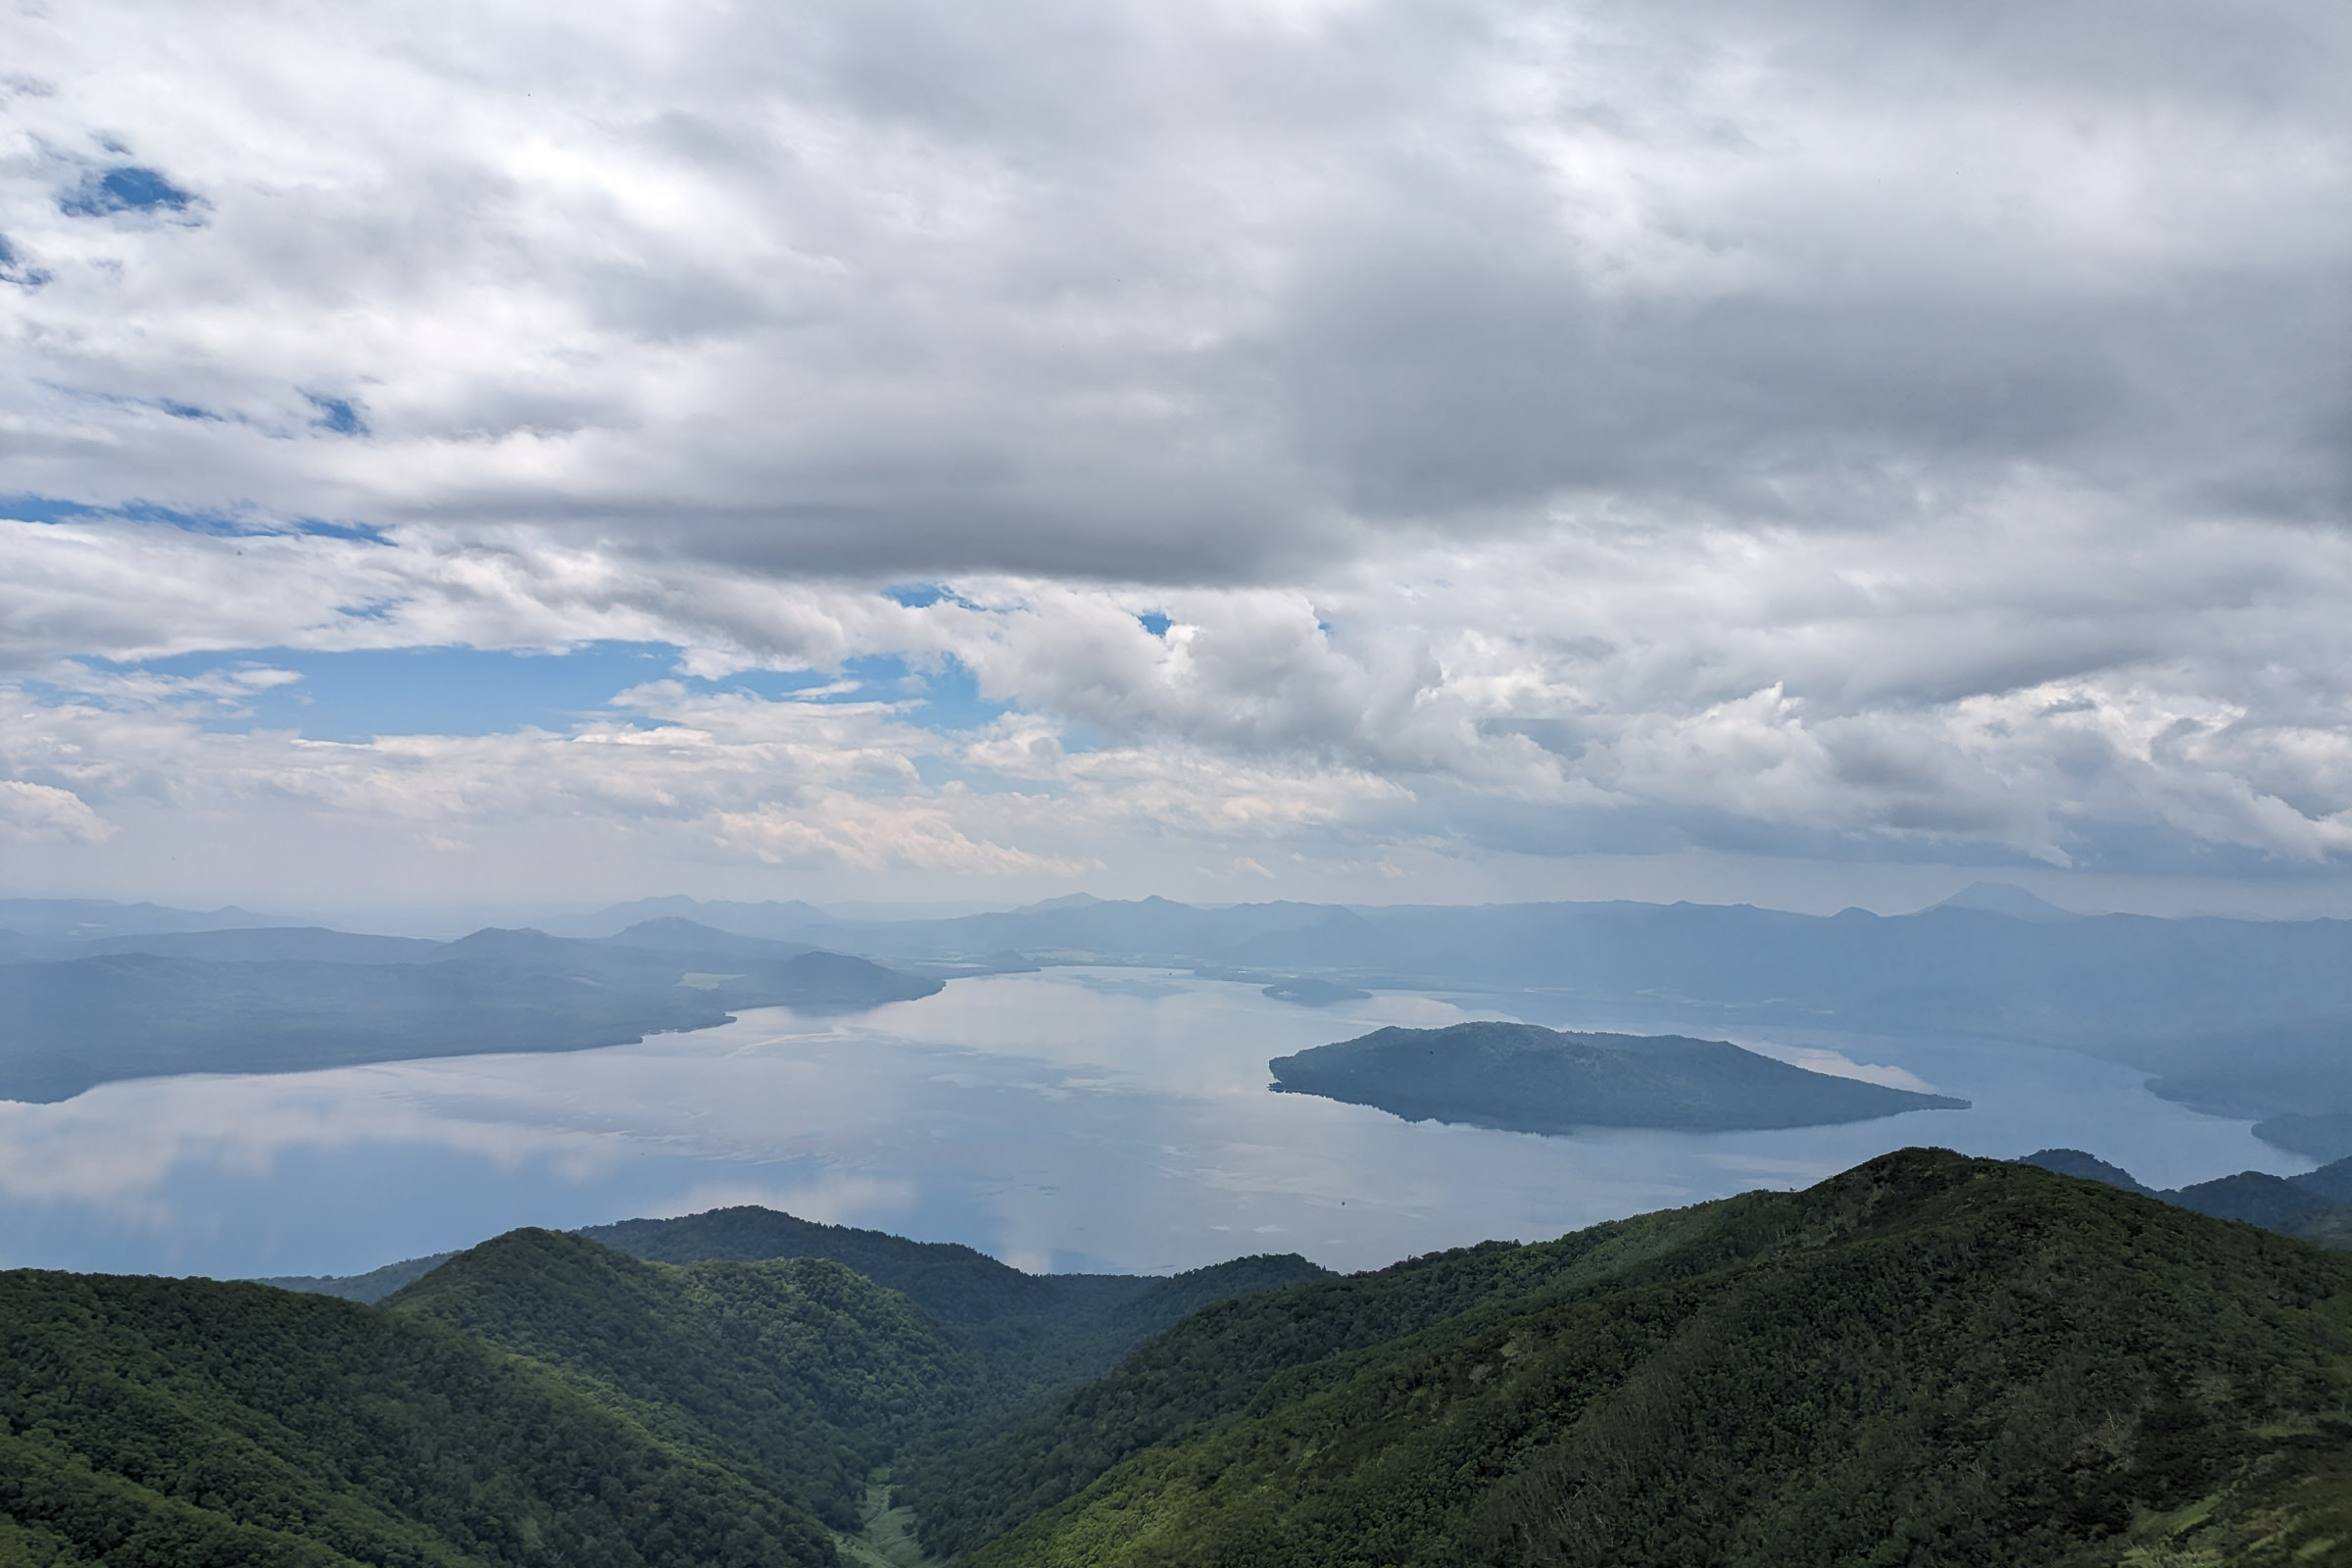 The view of Lake Kussharo from Mt. Mokoto. It is a partially cloudy day and an island is visible in the middle of the lake. 